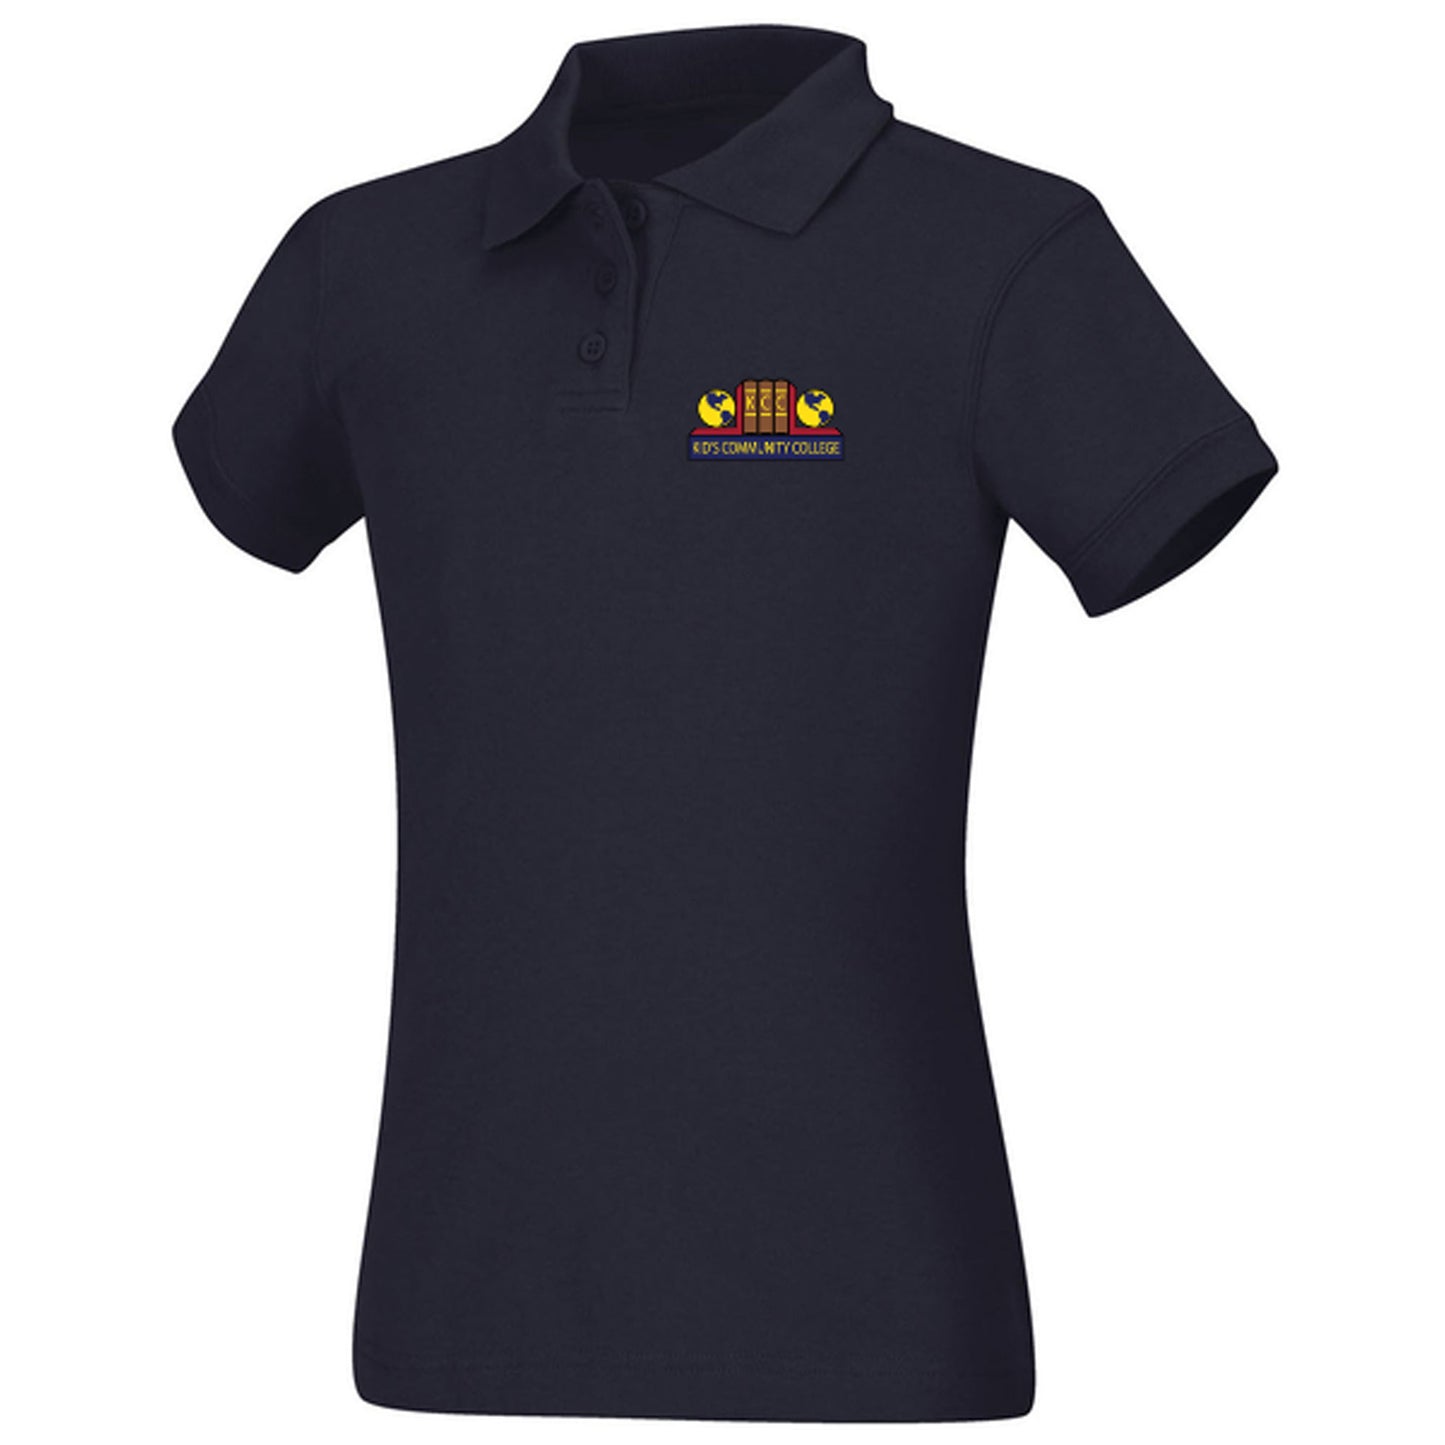 KCCSL Girls Elementary Fitted Polo - SPECIAL ORDER!